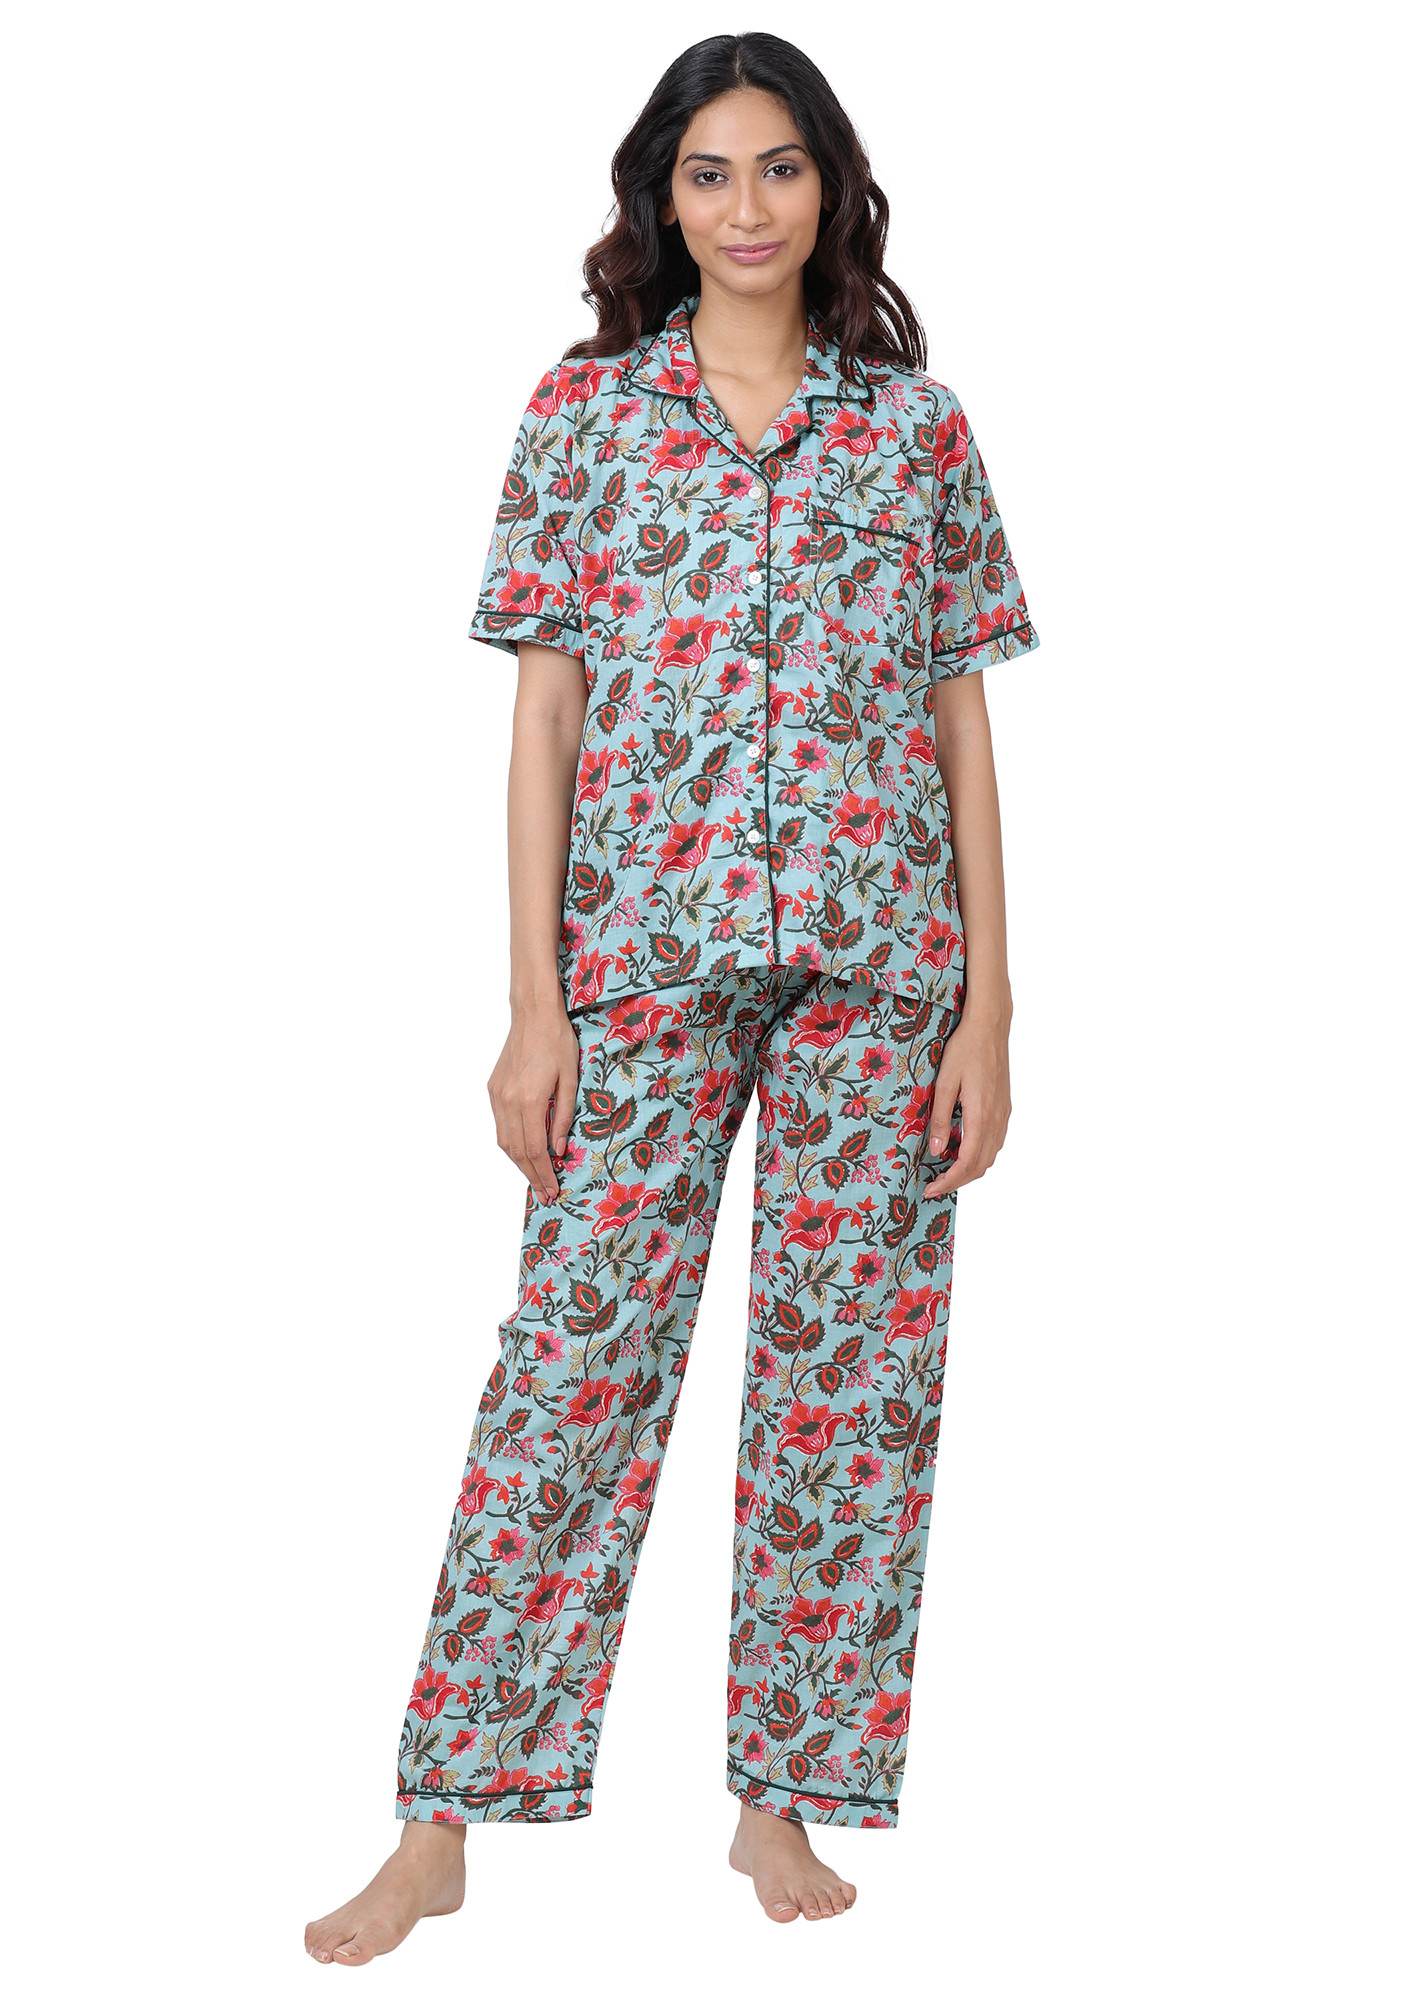 Jockey Women's Super Combed Cotton Pajama – Online Shopping site in India